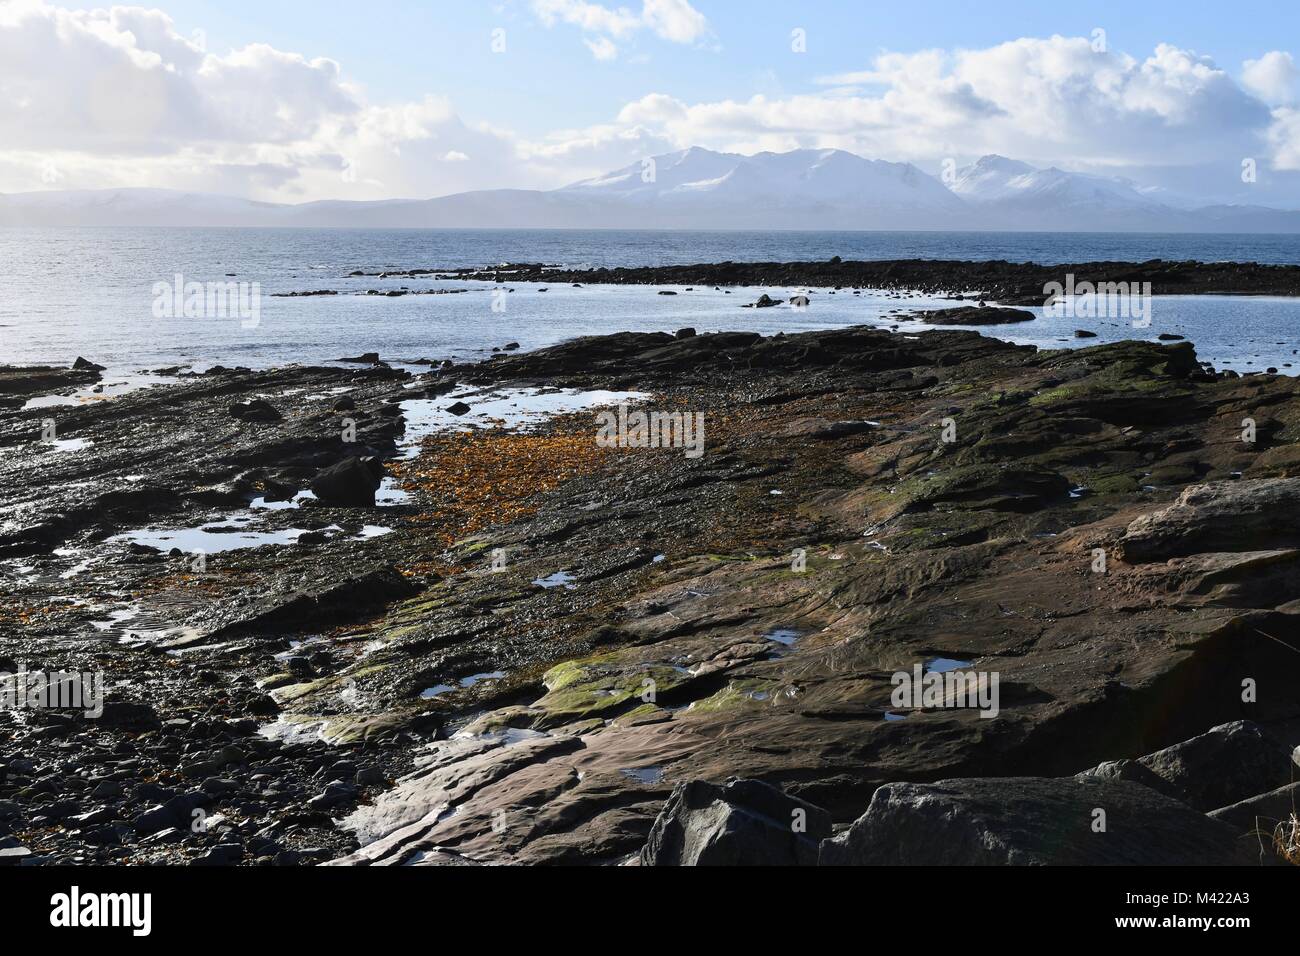 View across the Clyde from Seamill Beach Stock Photo